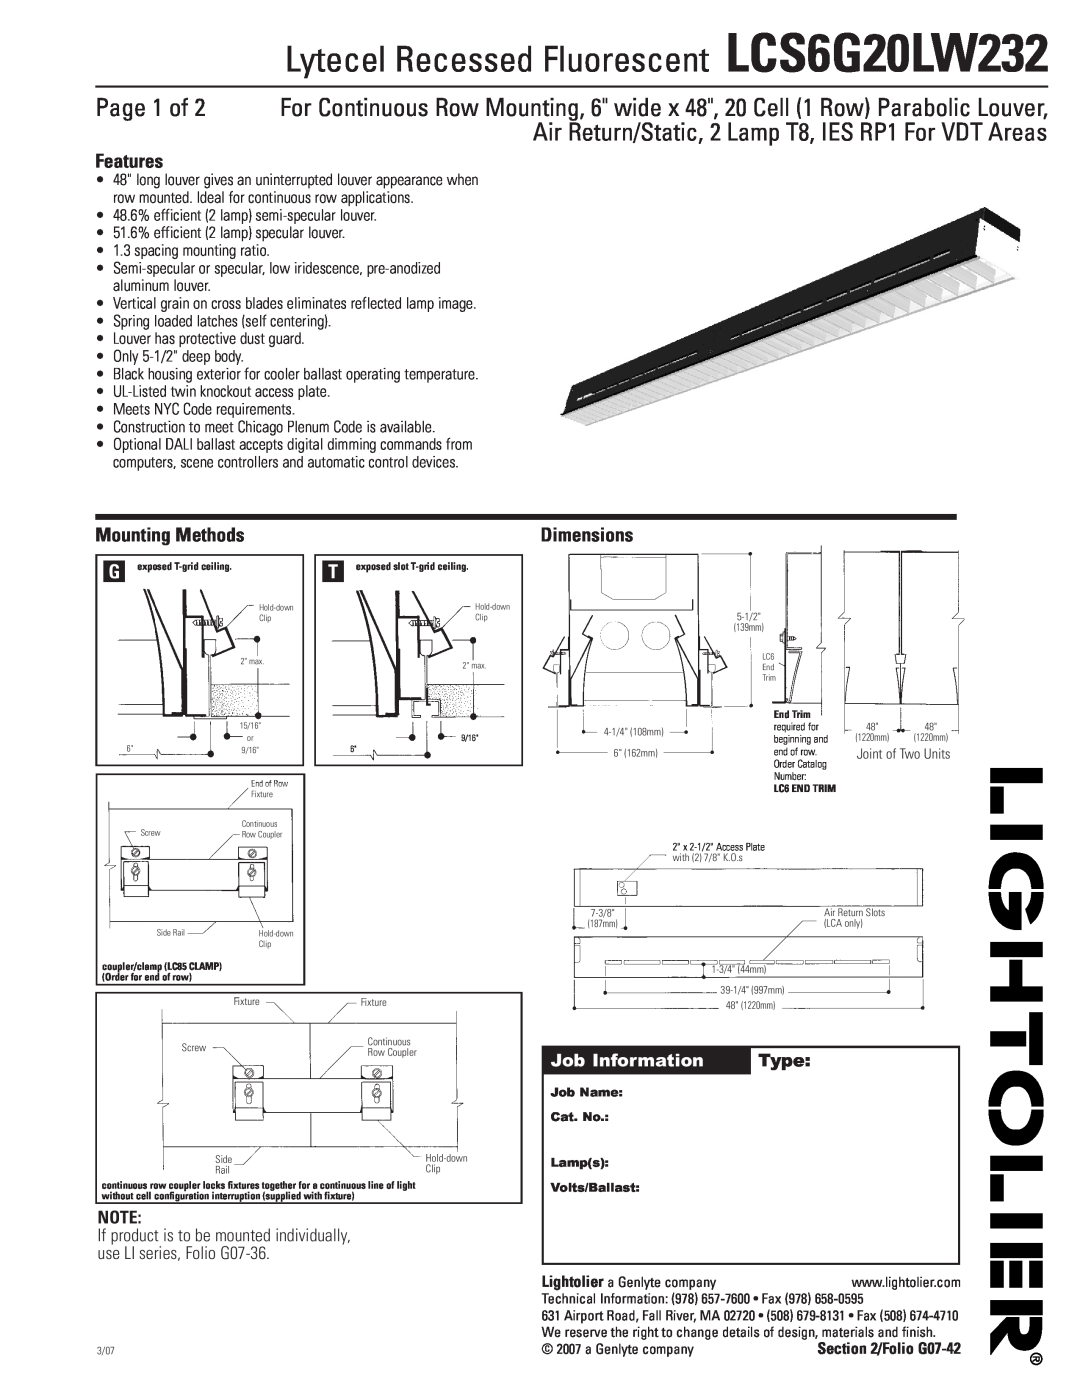 Lightolier LCS6G20LW232 dimensions Features, Mounting Methods, Dimensions, Job Information, Type 